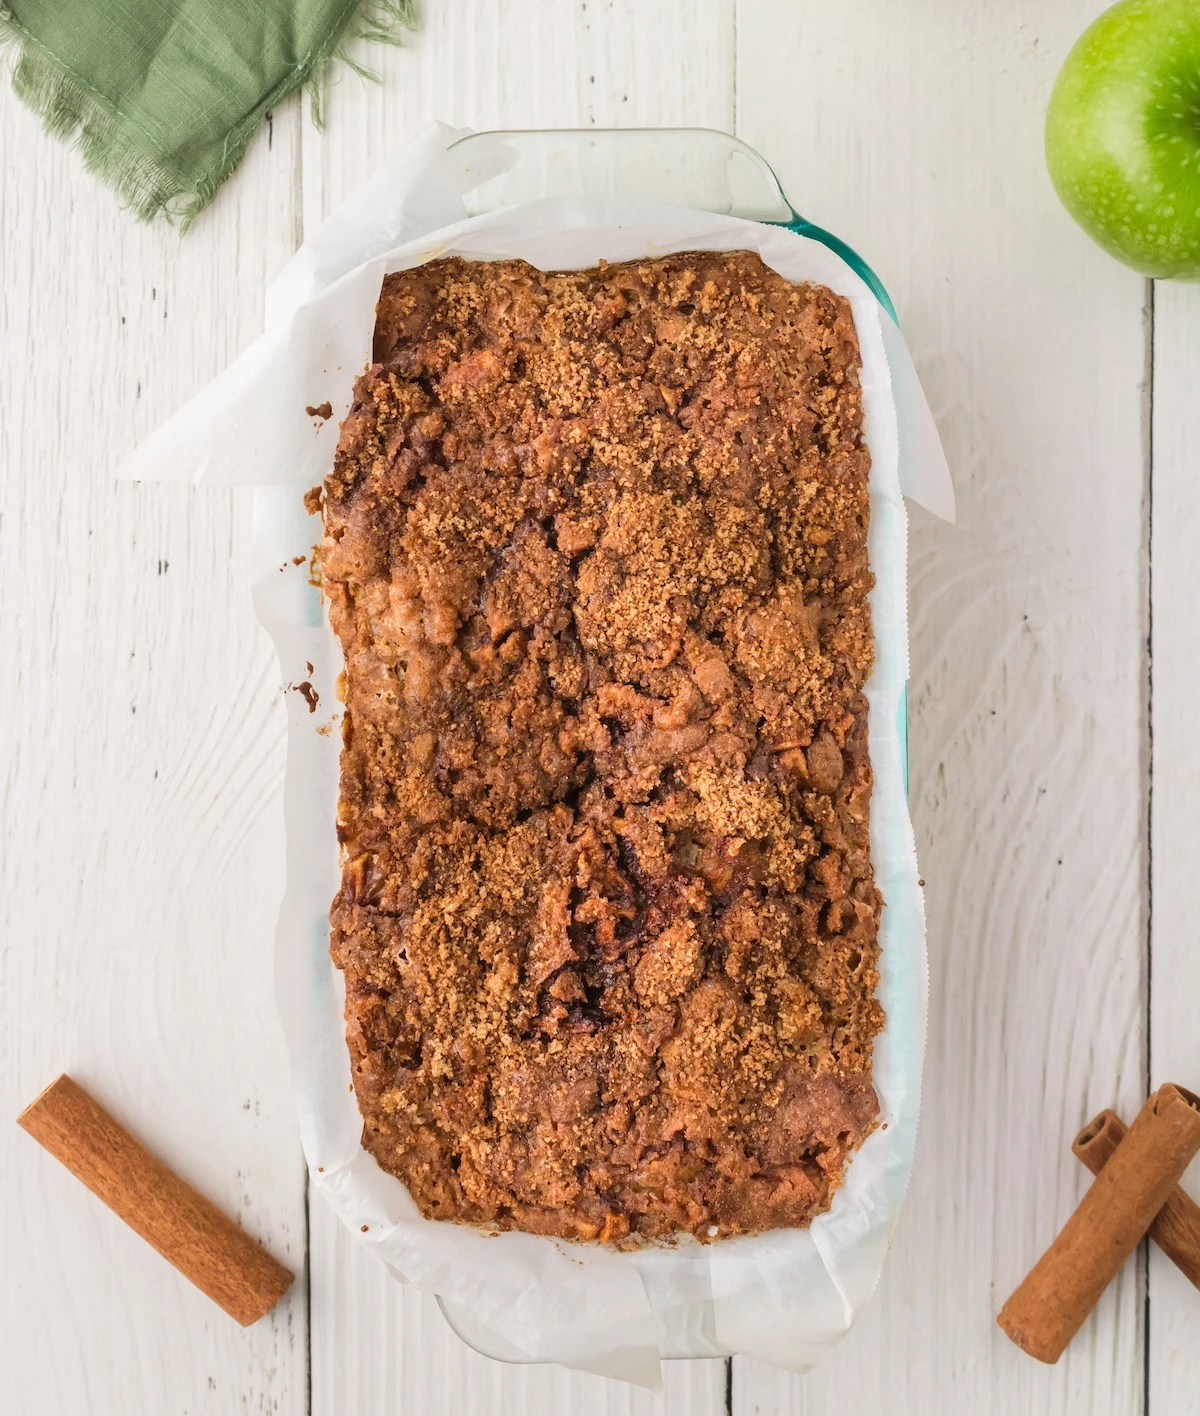 Baked apple bread recipe in a pan cooling